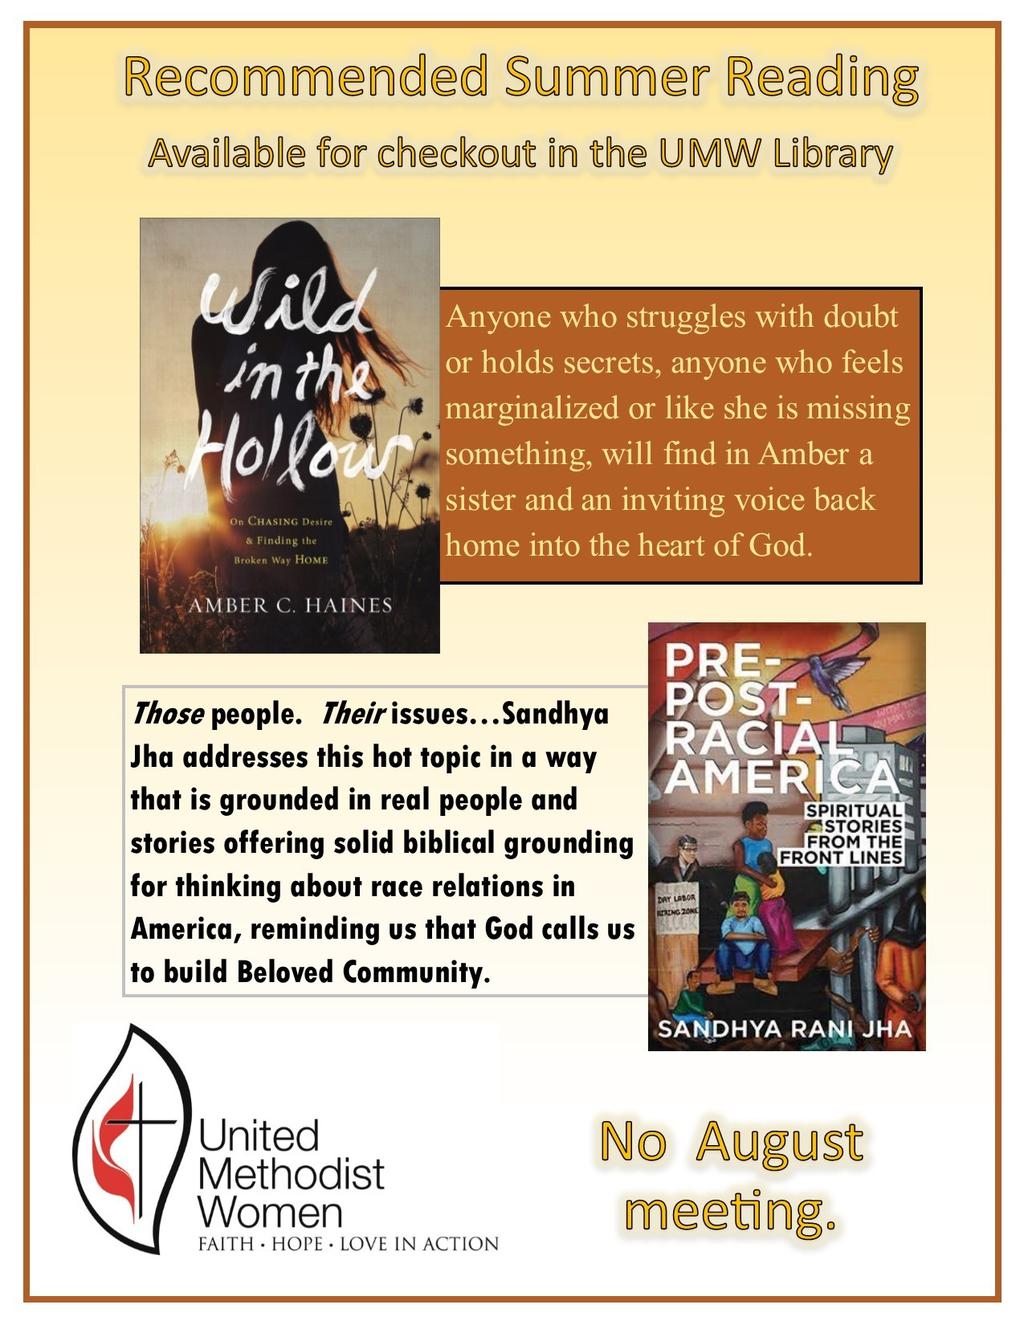 August 13 3-5pm An open time of self guided prayer throughout our church building for our various ministries and leaders.